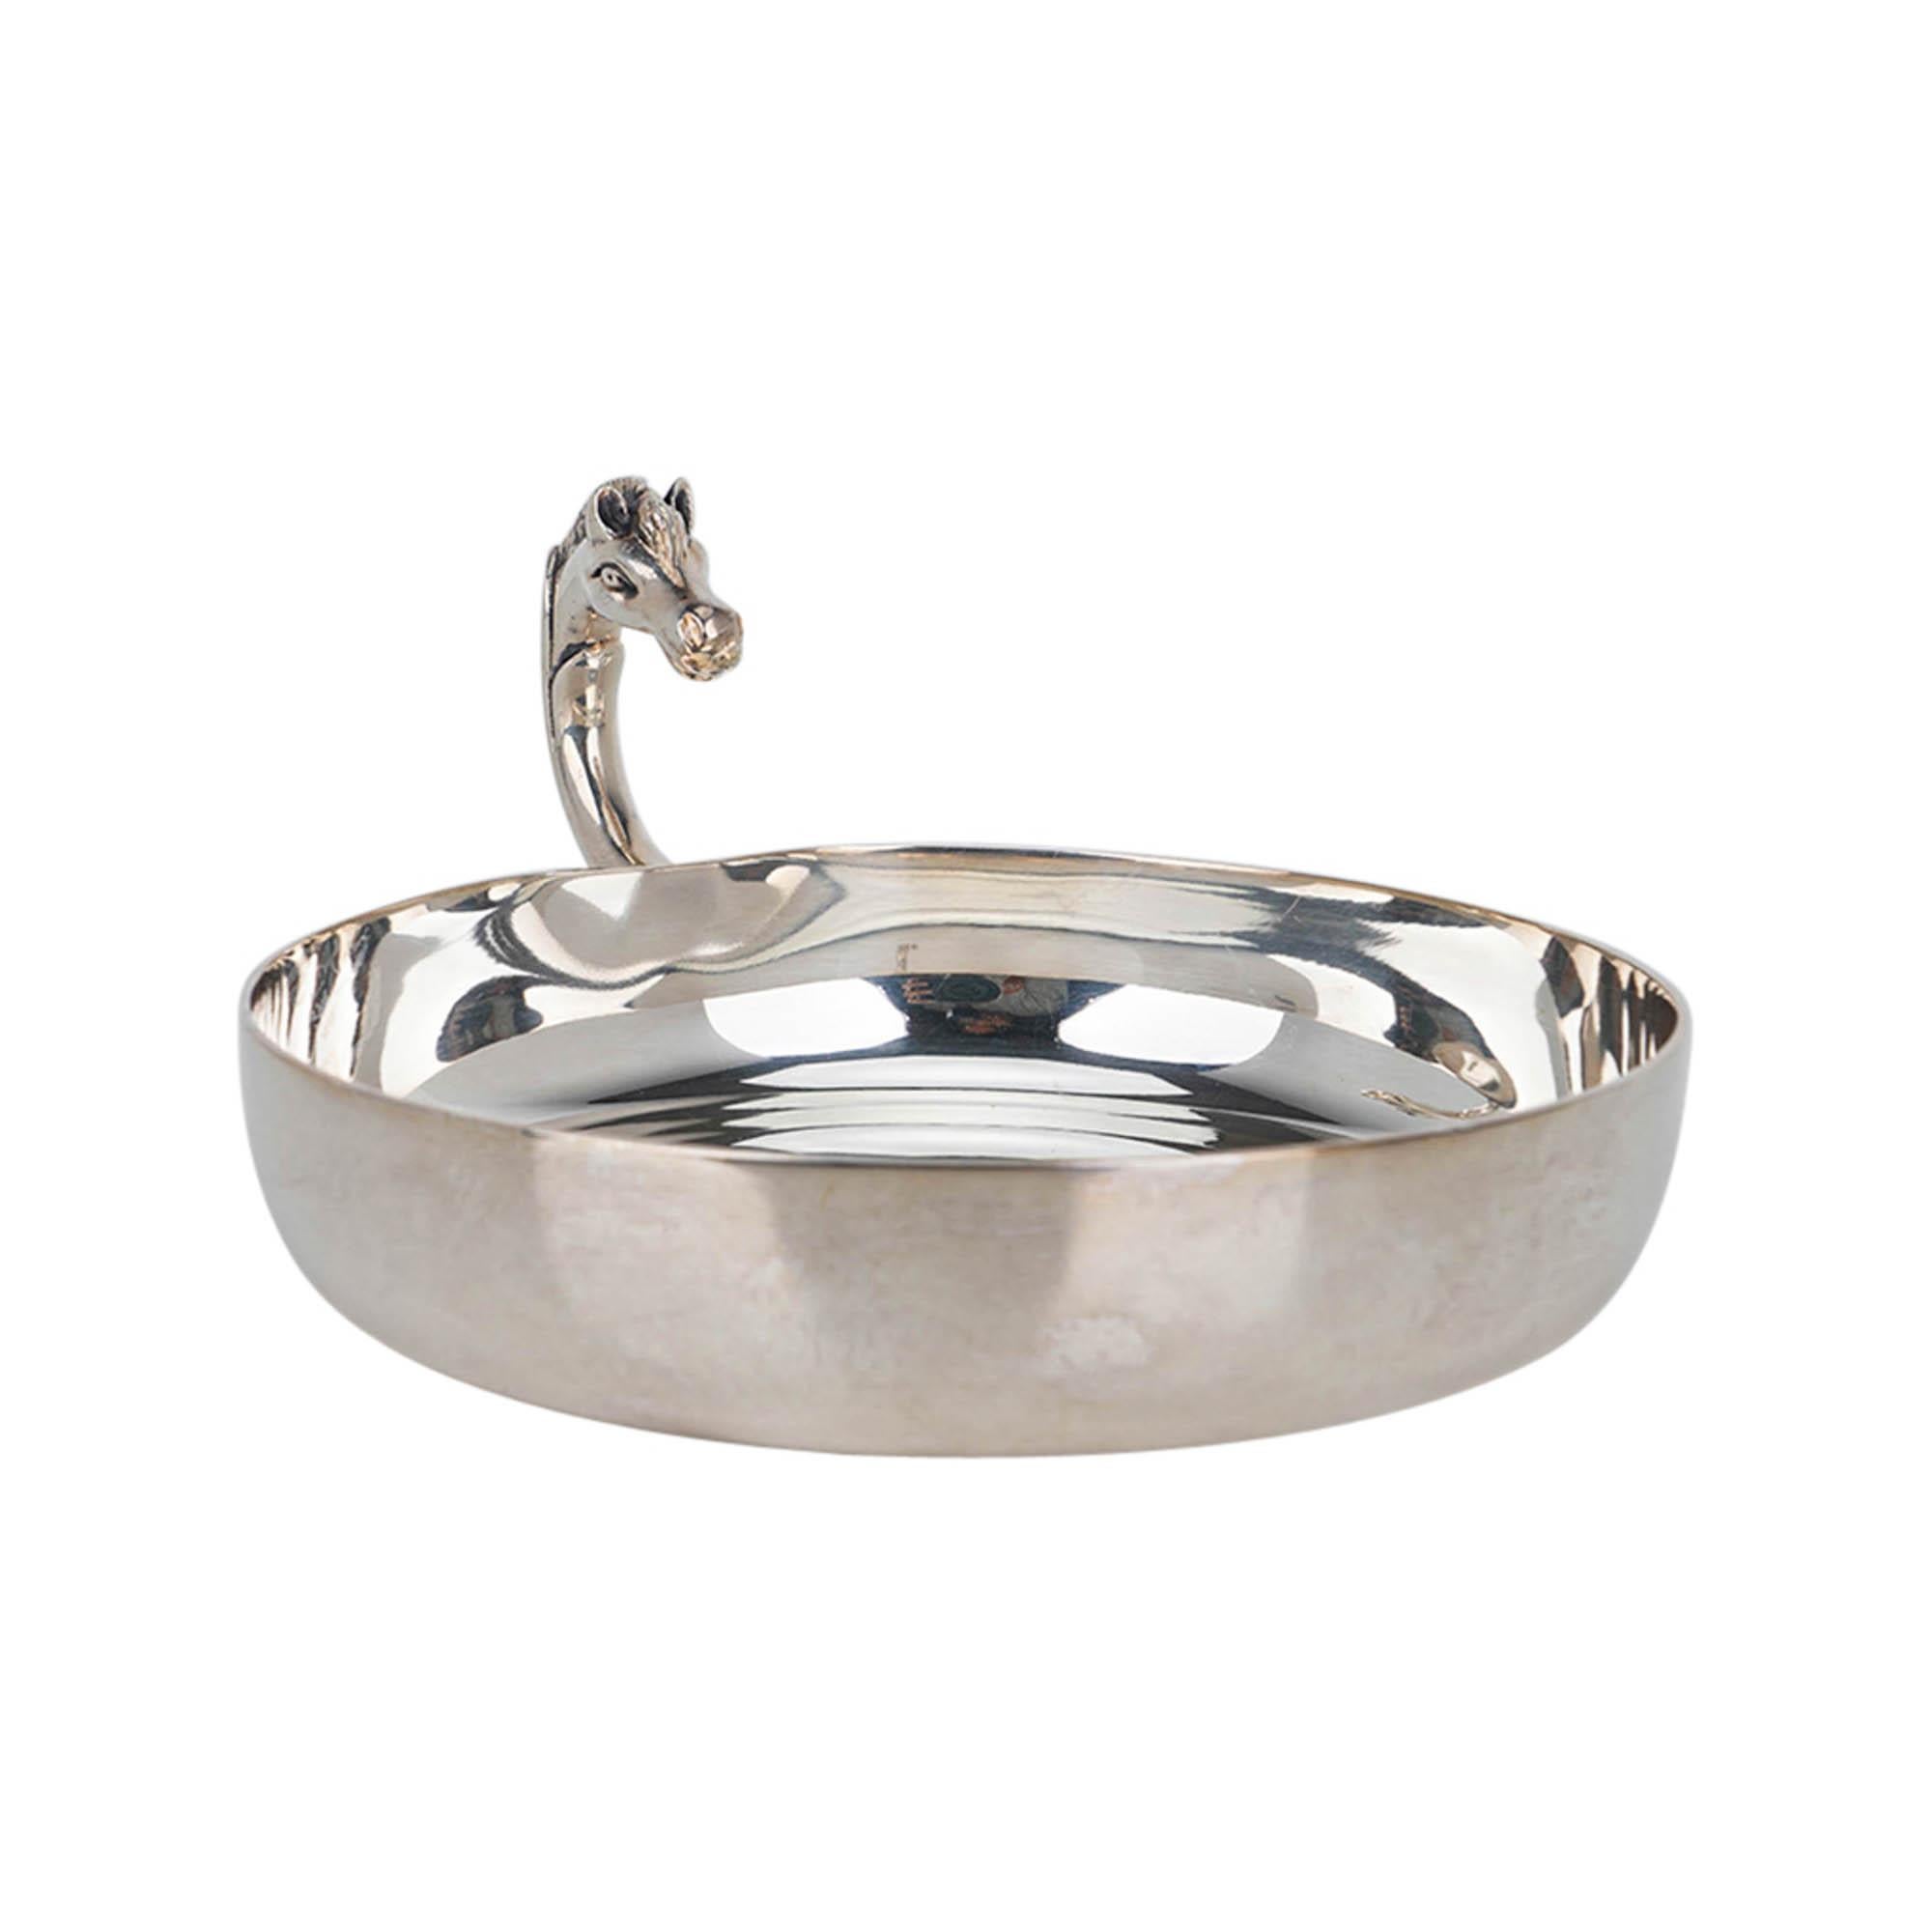 Hermes Silver Horse Head Catch All Pin Tray im Angebot 1